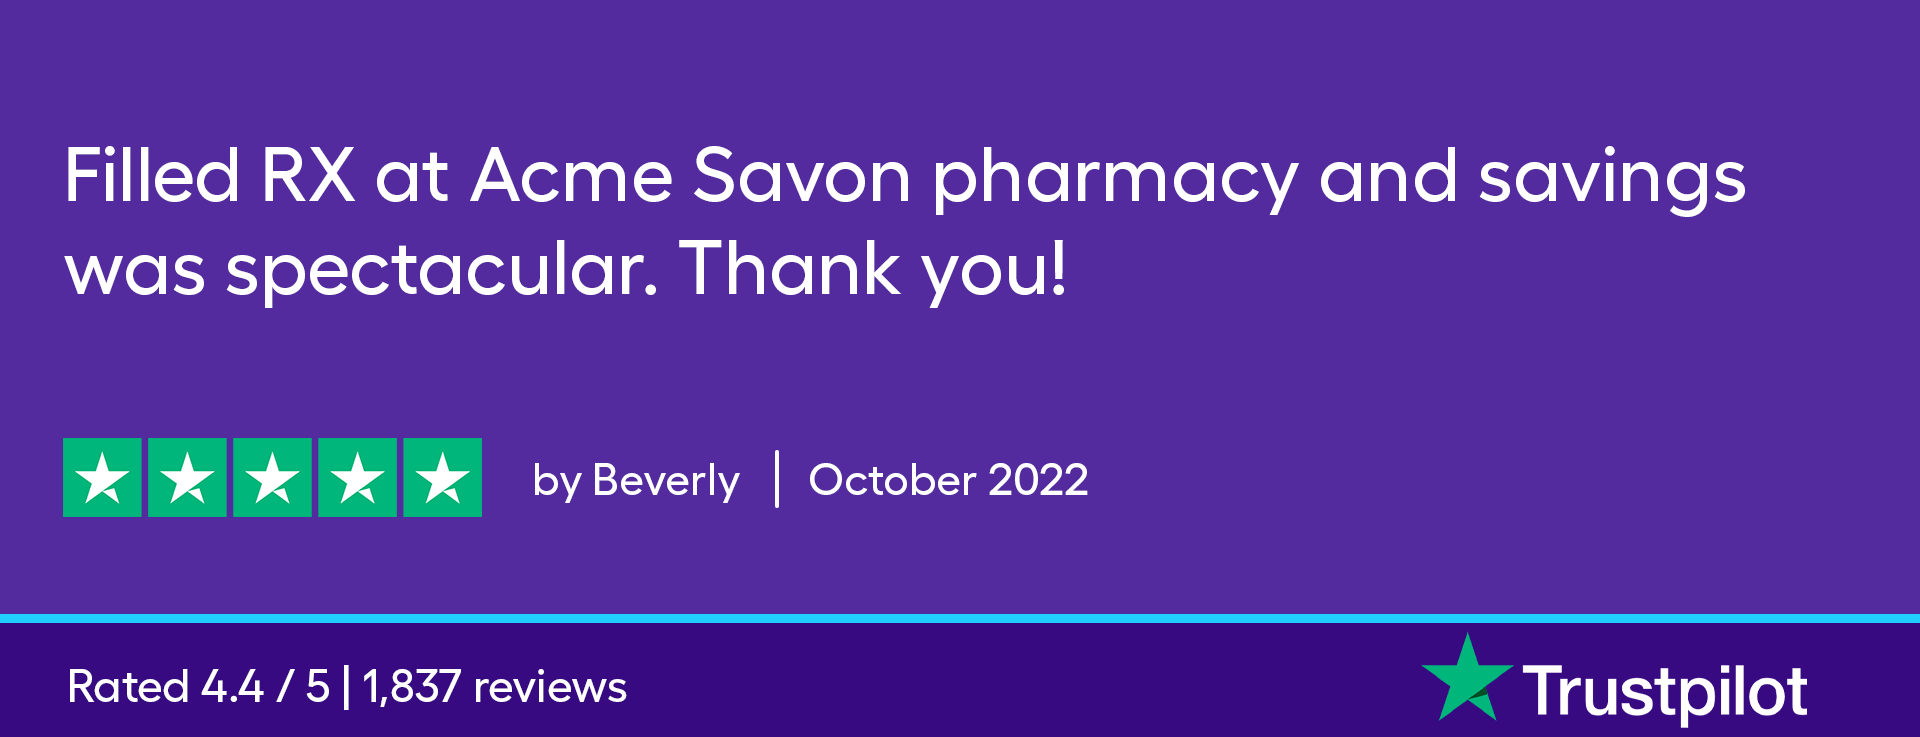 Filled RX at Acme Savon pharmacy and savings was spectacular. Thank you!